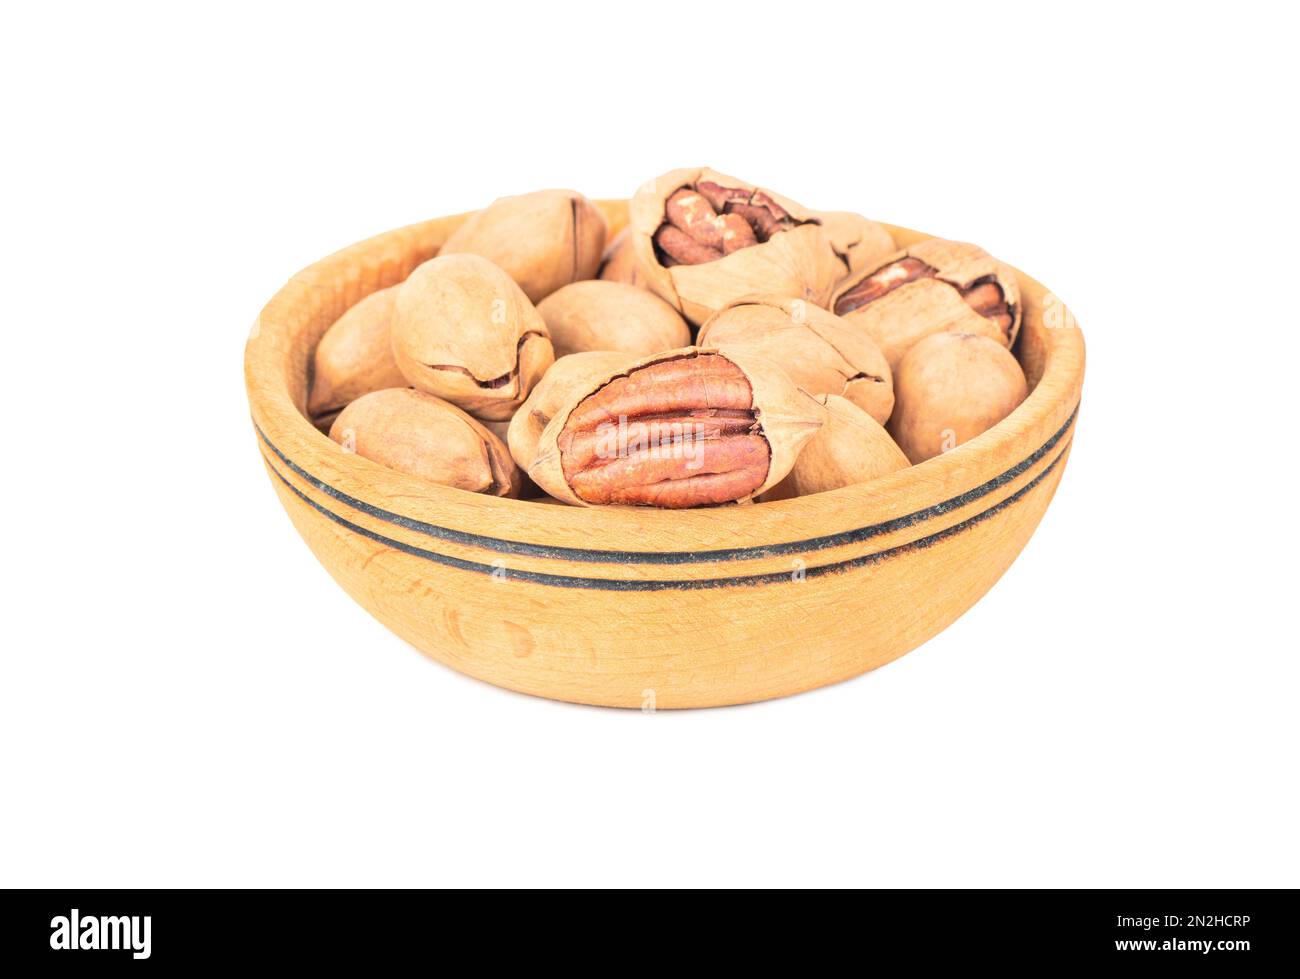 Pecan nuts in a large wooden bowl on a white background Stock Photo